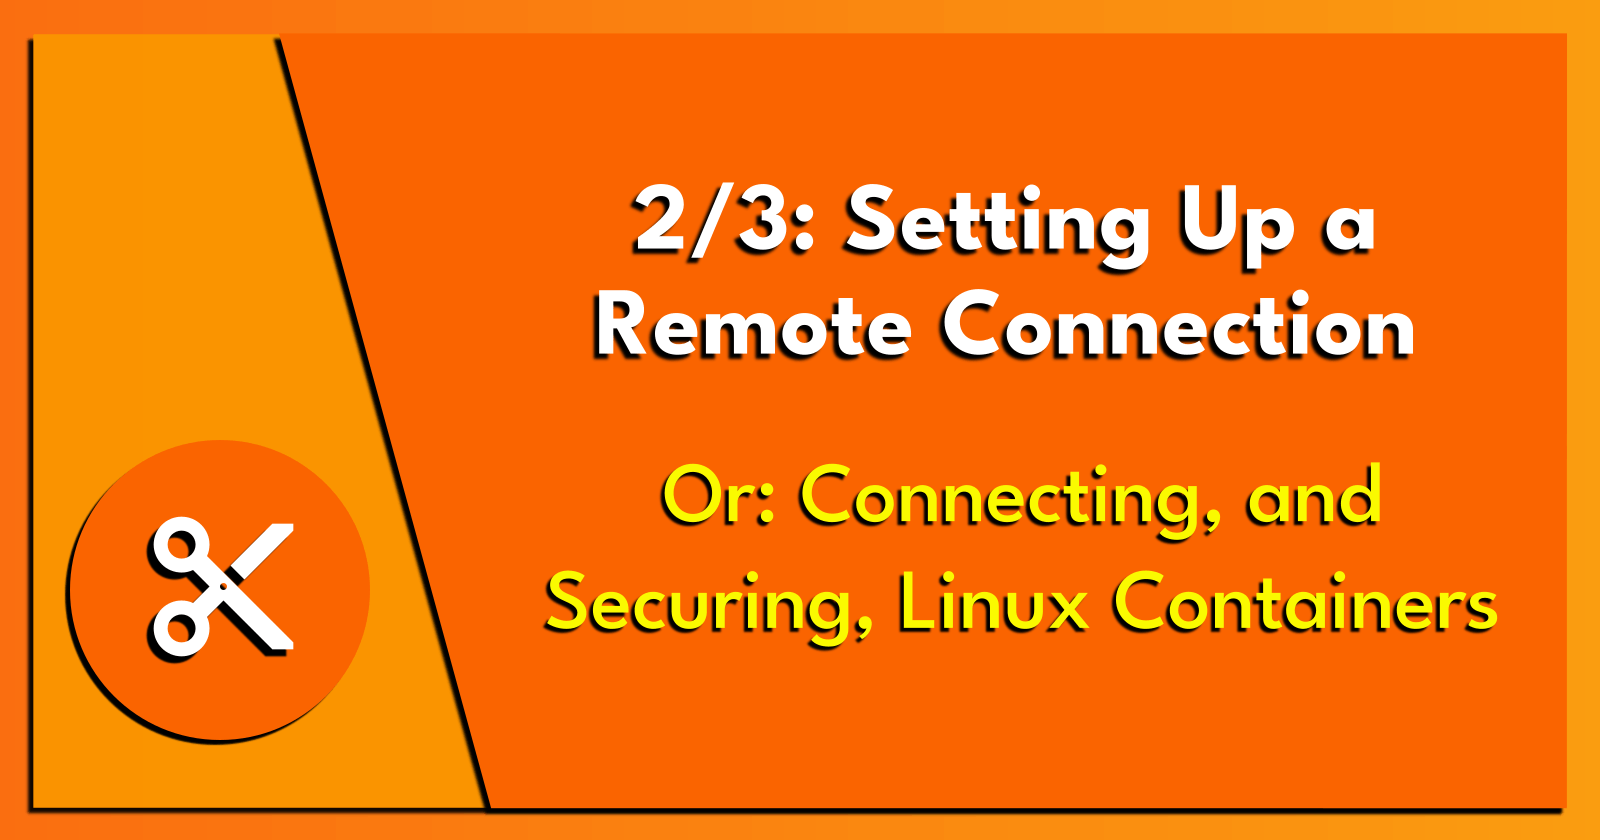 2/3: Setting Up a Remote Connection.